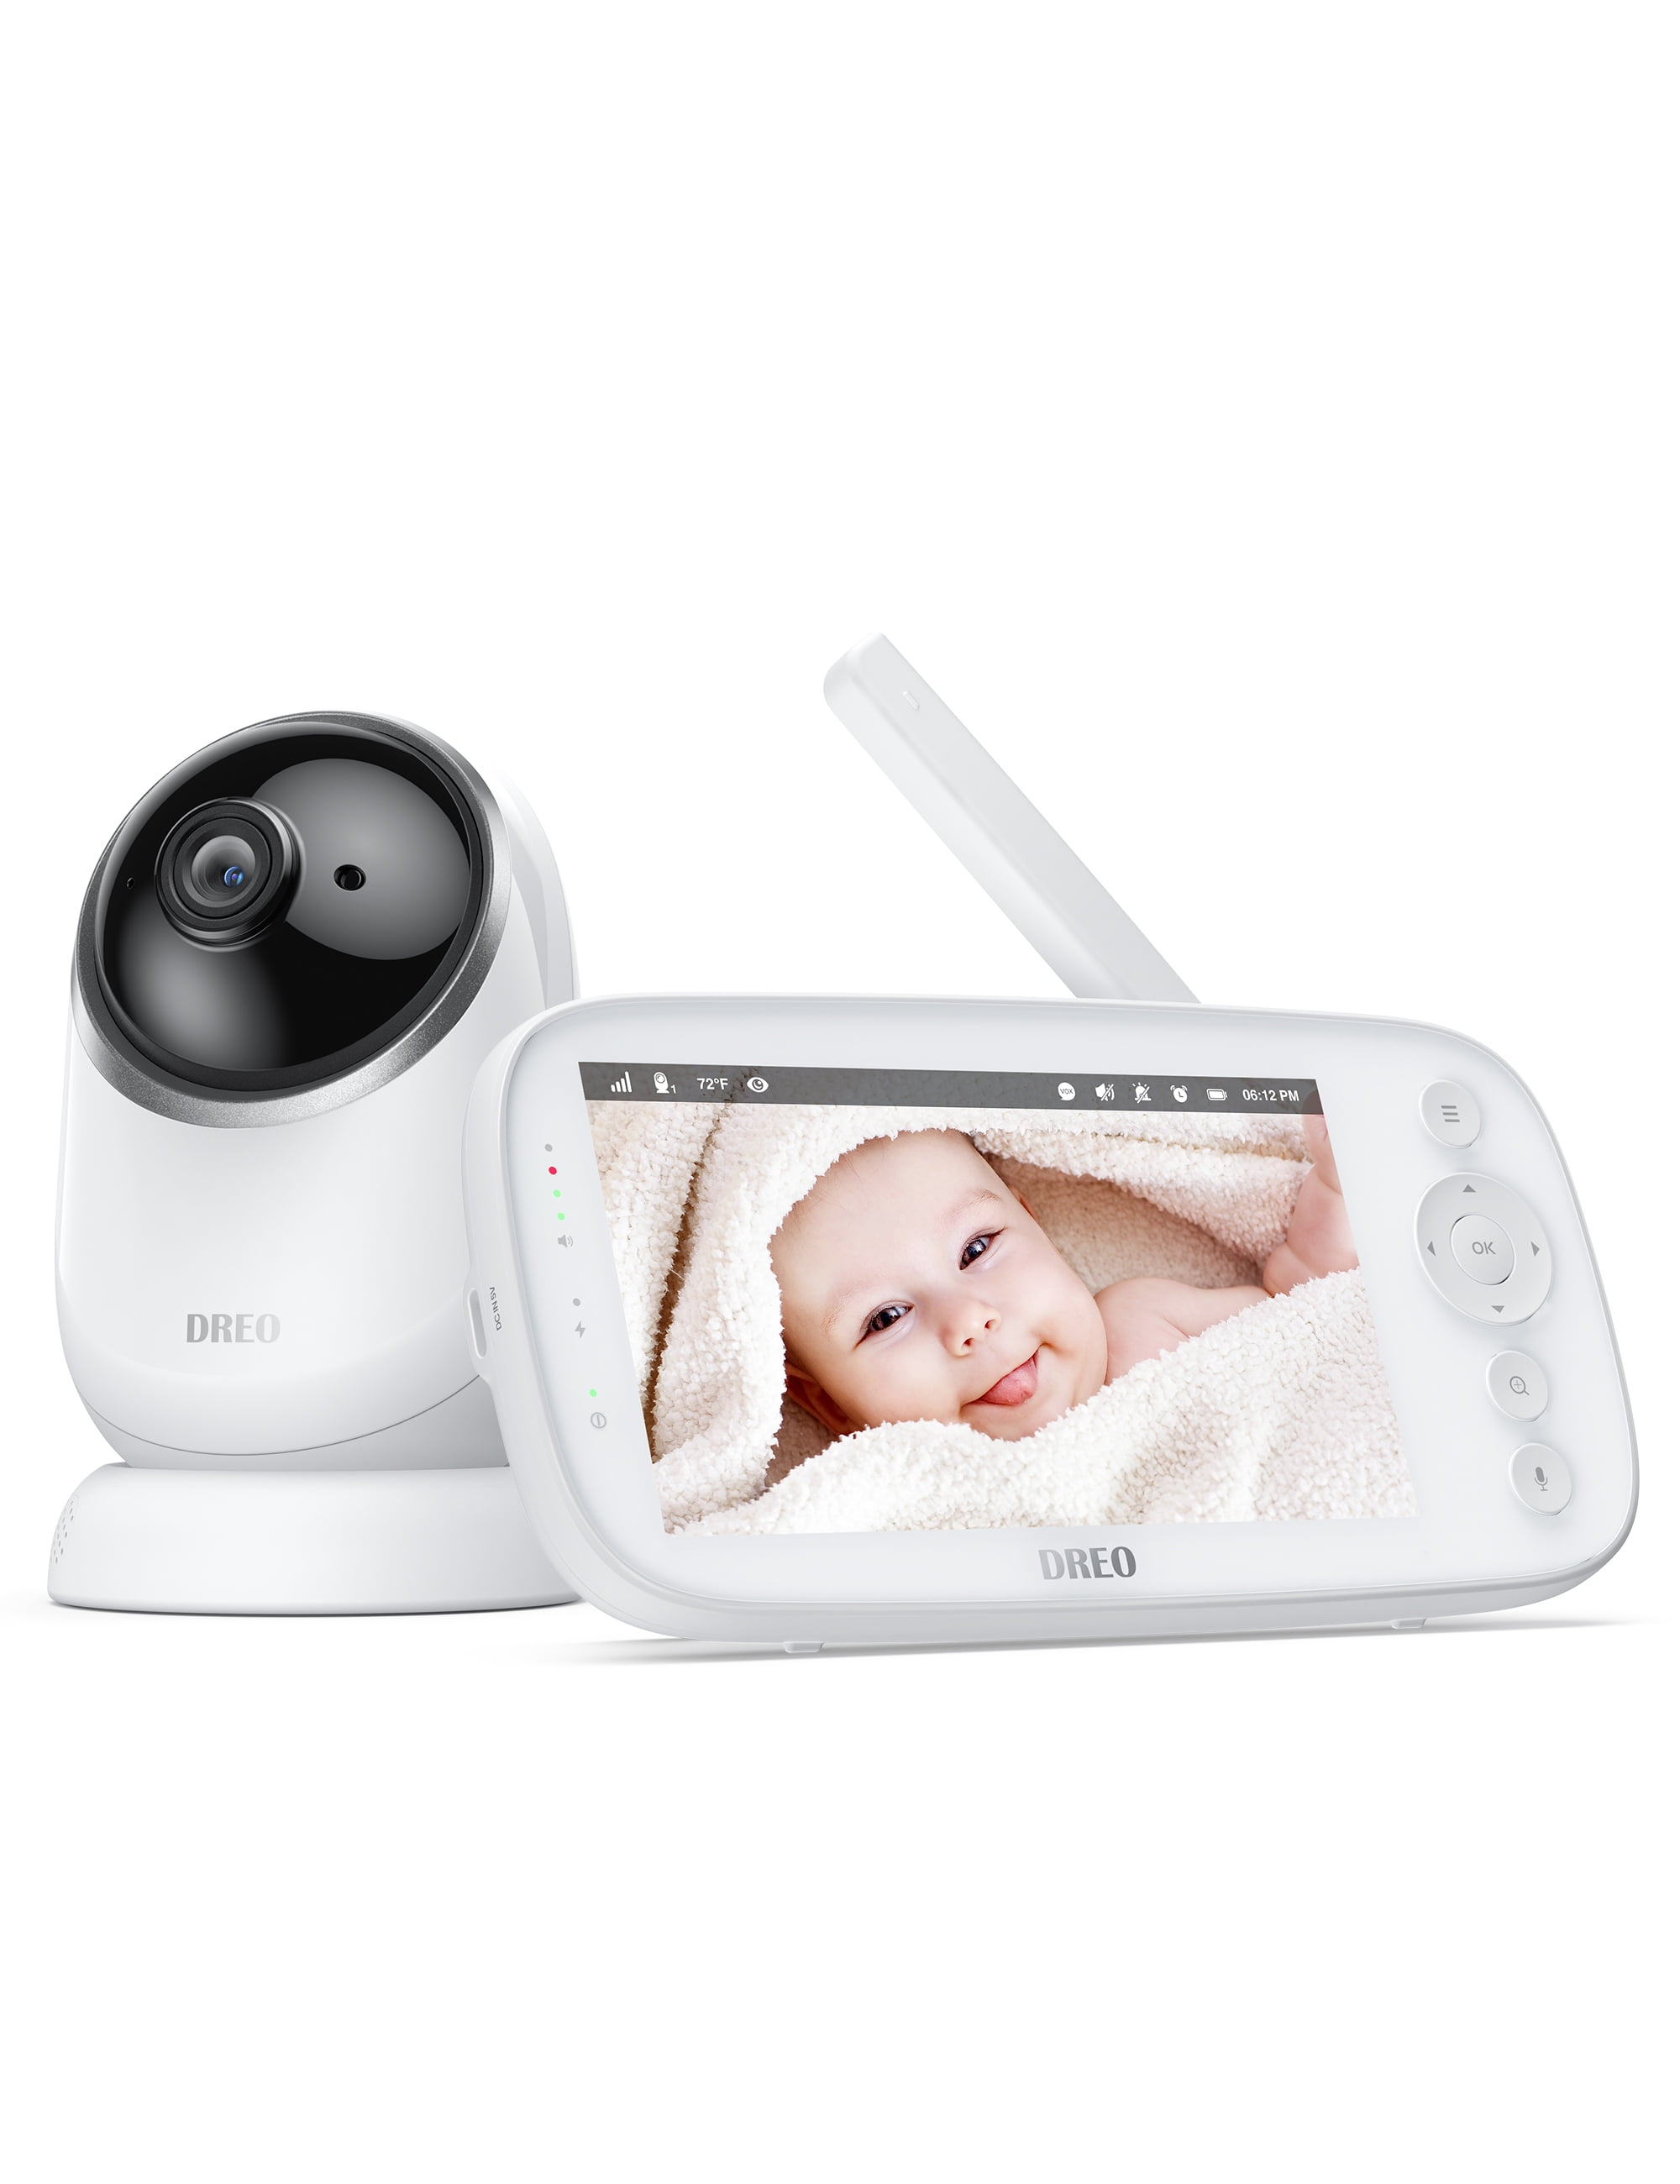 Security Video Baby Monitor with Camera& Audio,720p HD 5" Display Night Vision. 